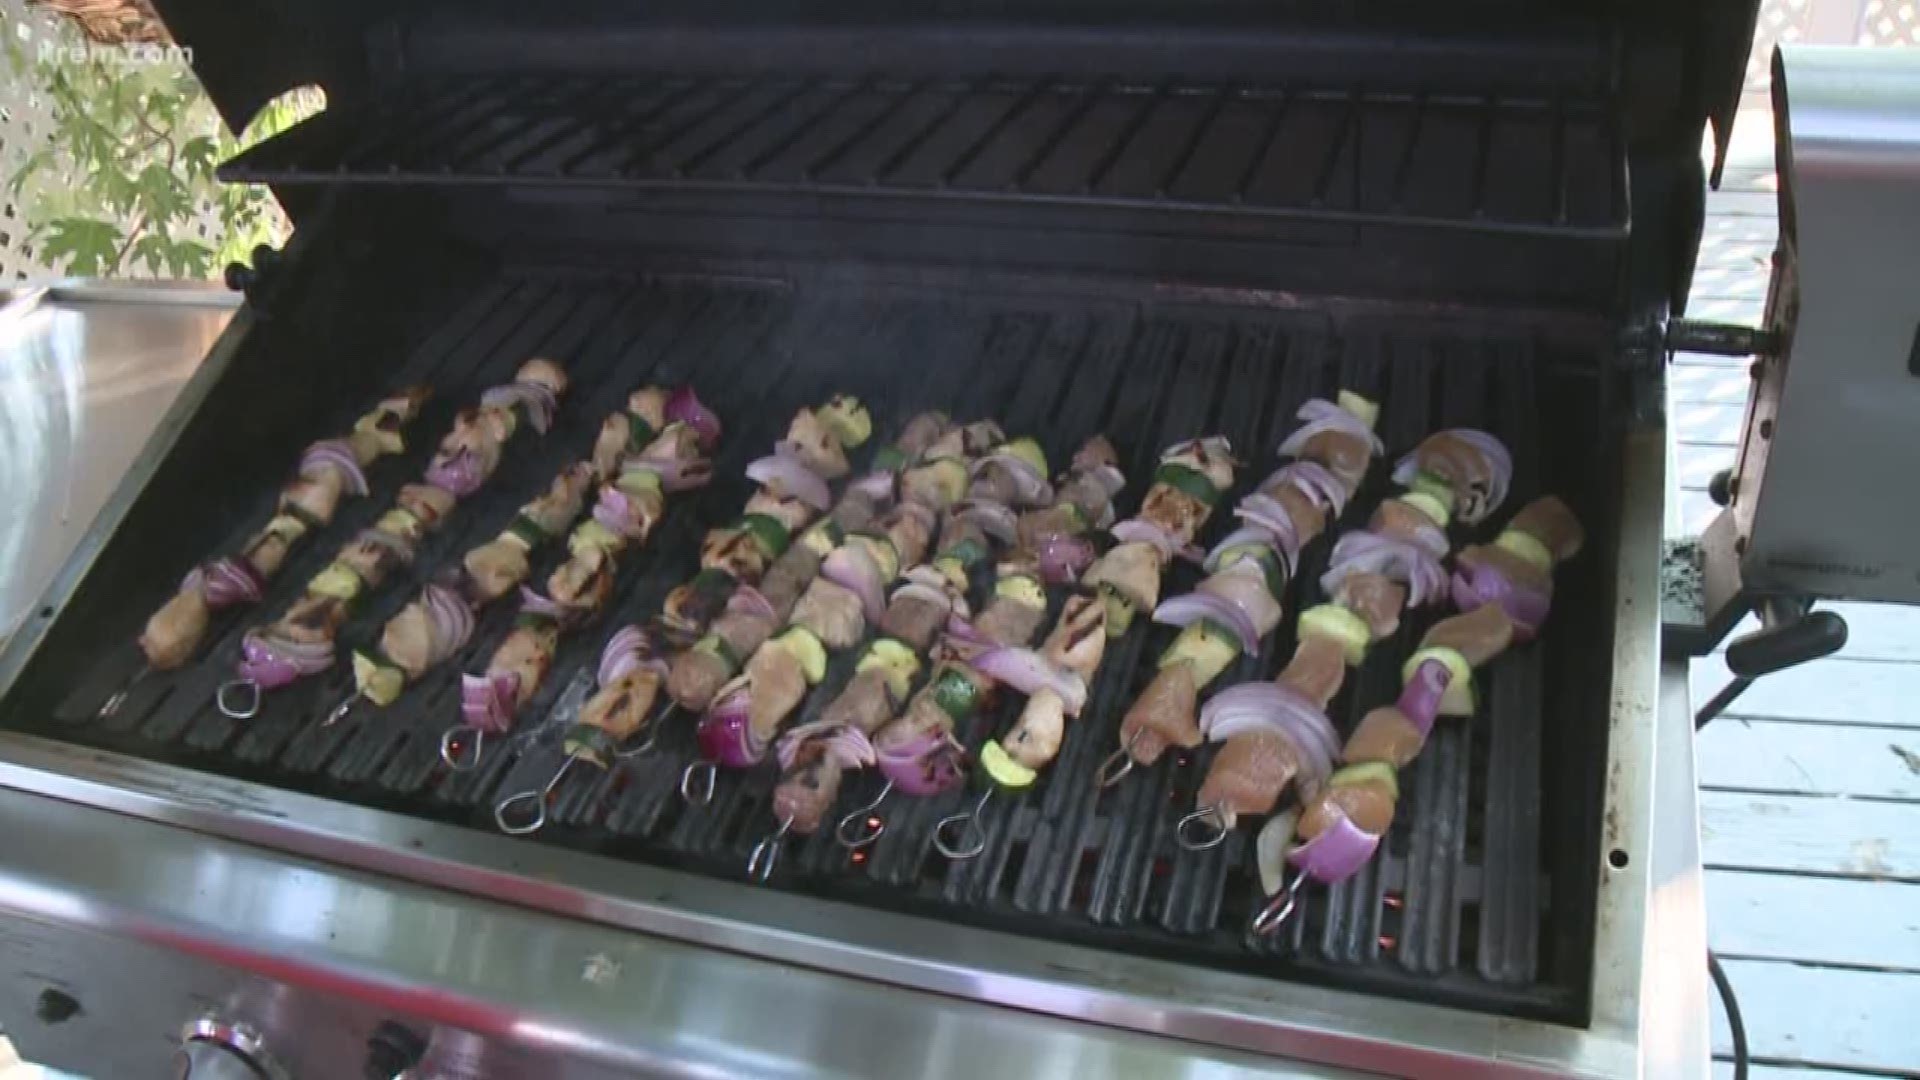 Tom's BBQ Forecast: Marinated beef and chicken kabobs (8-9-18)